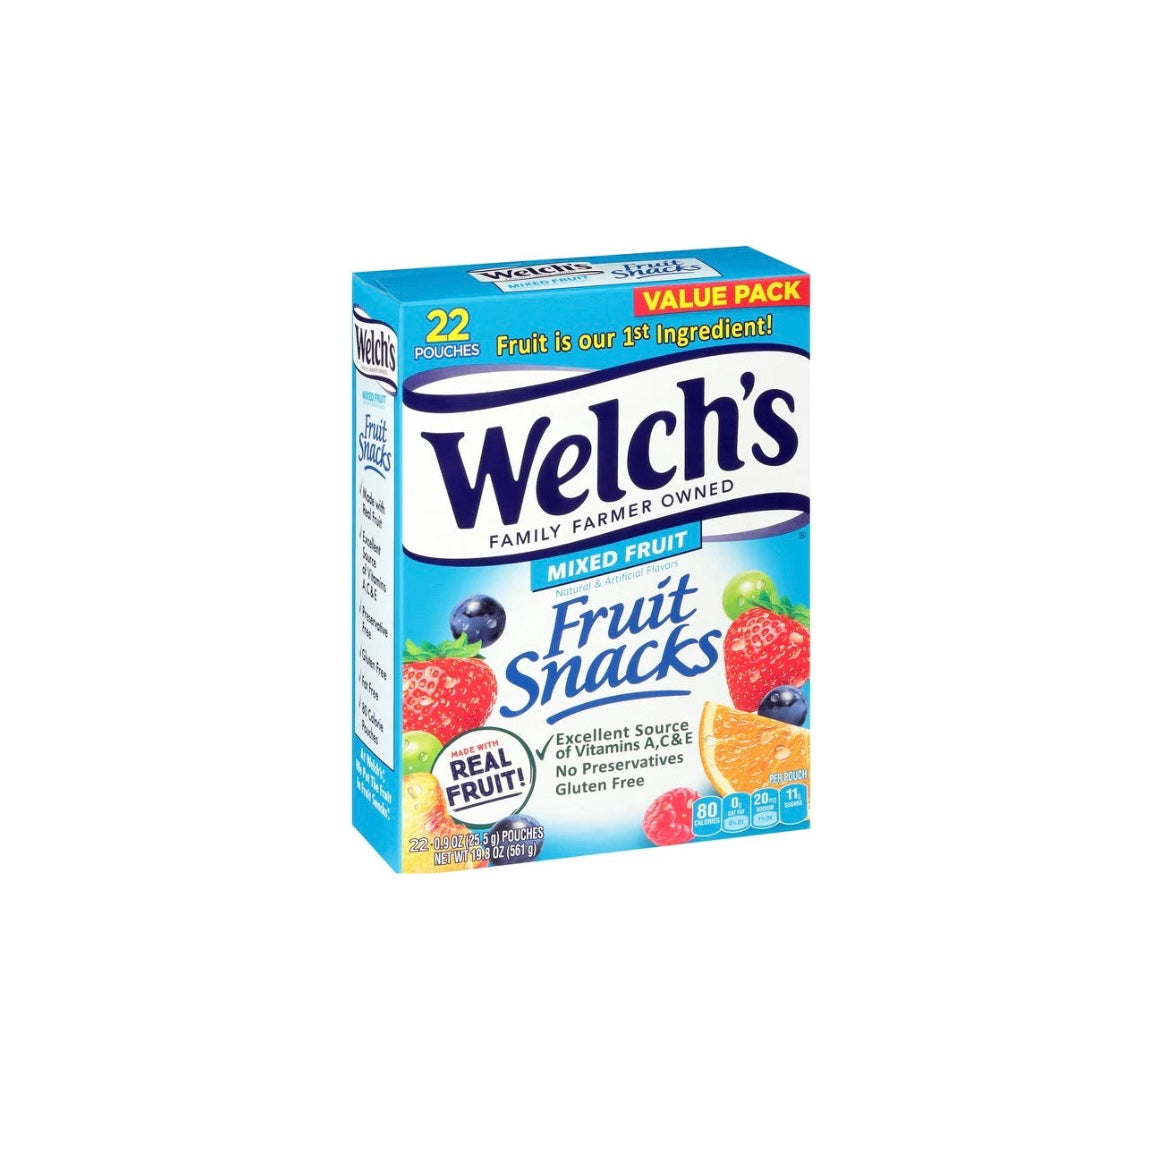 Welch's Mixed Fruit Fruit Snacks Value Pack 22 ct (5006166)